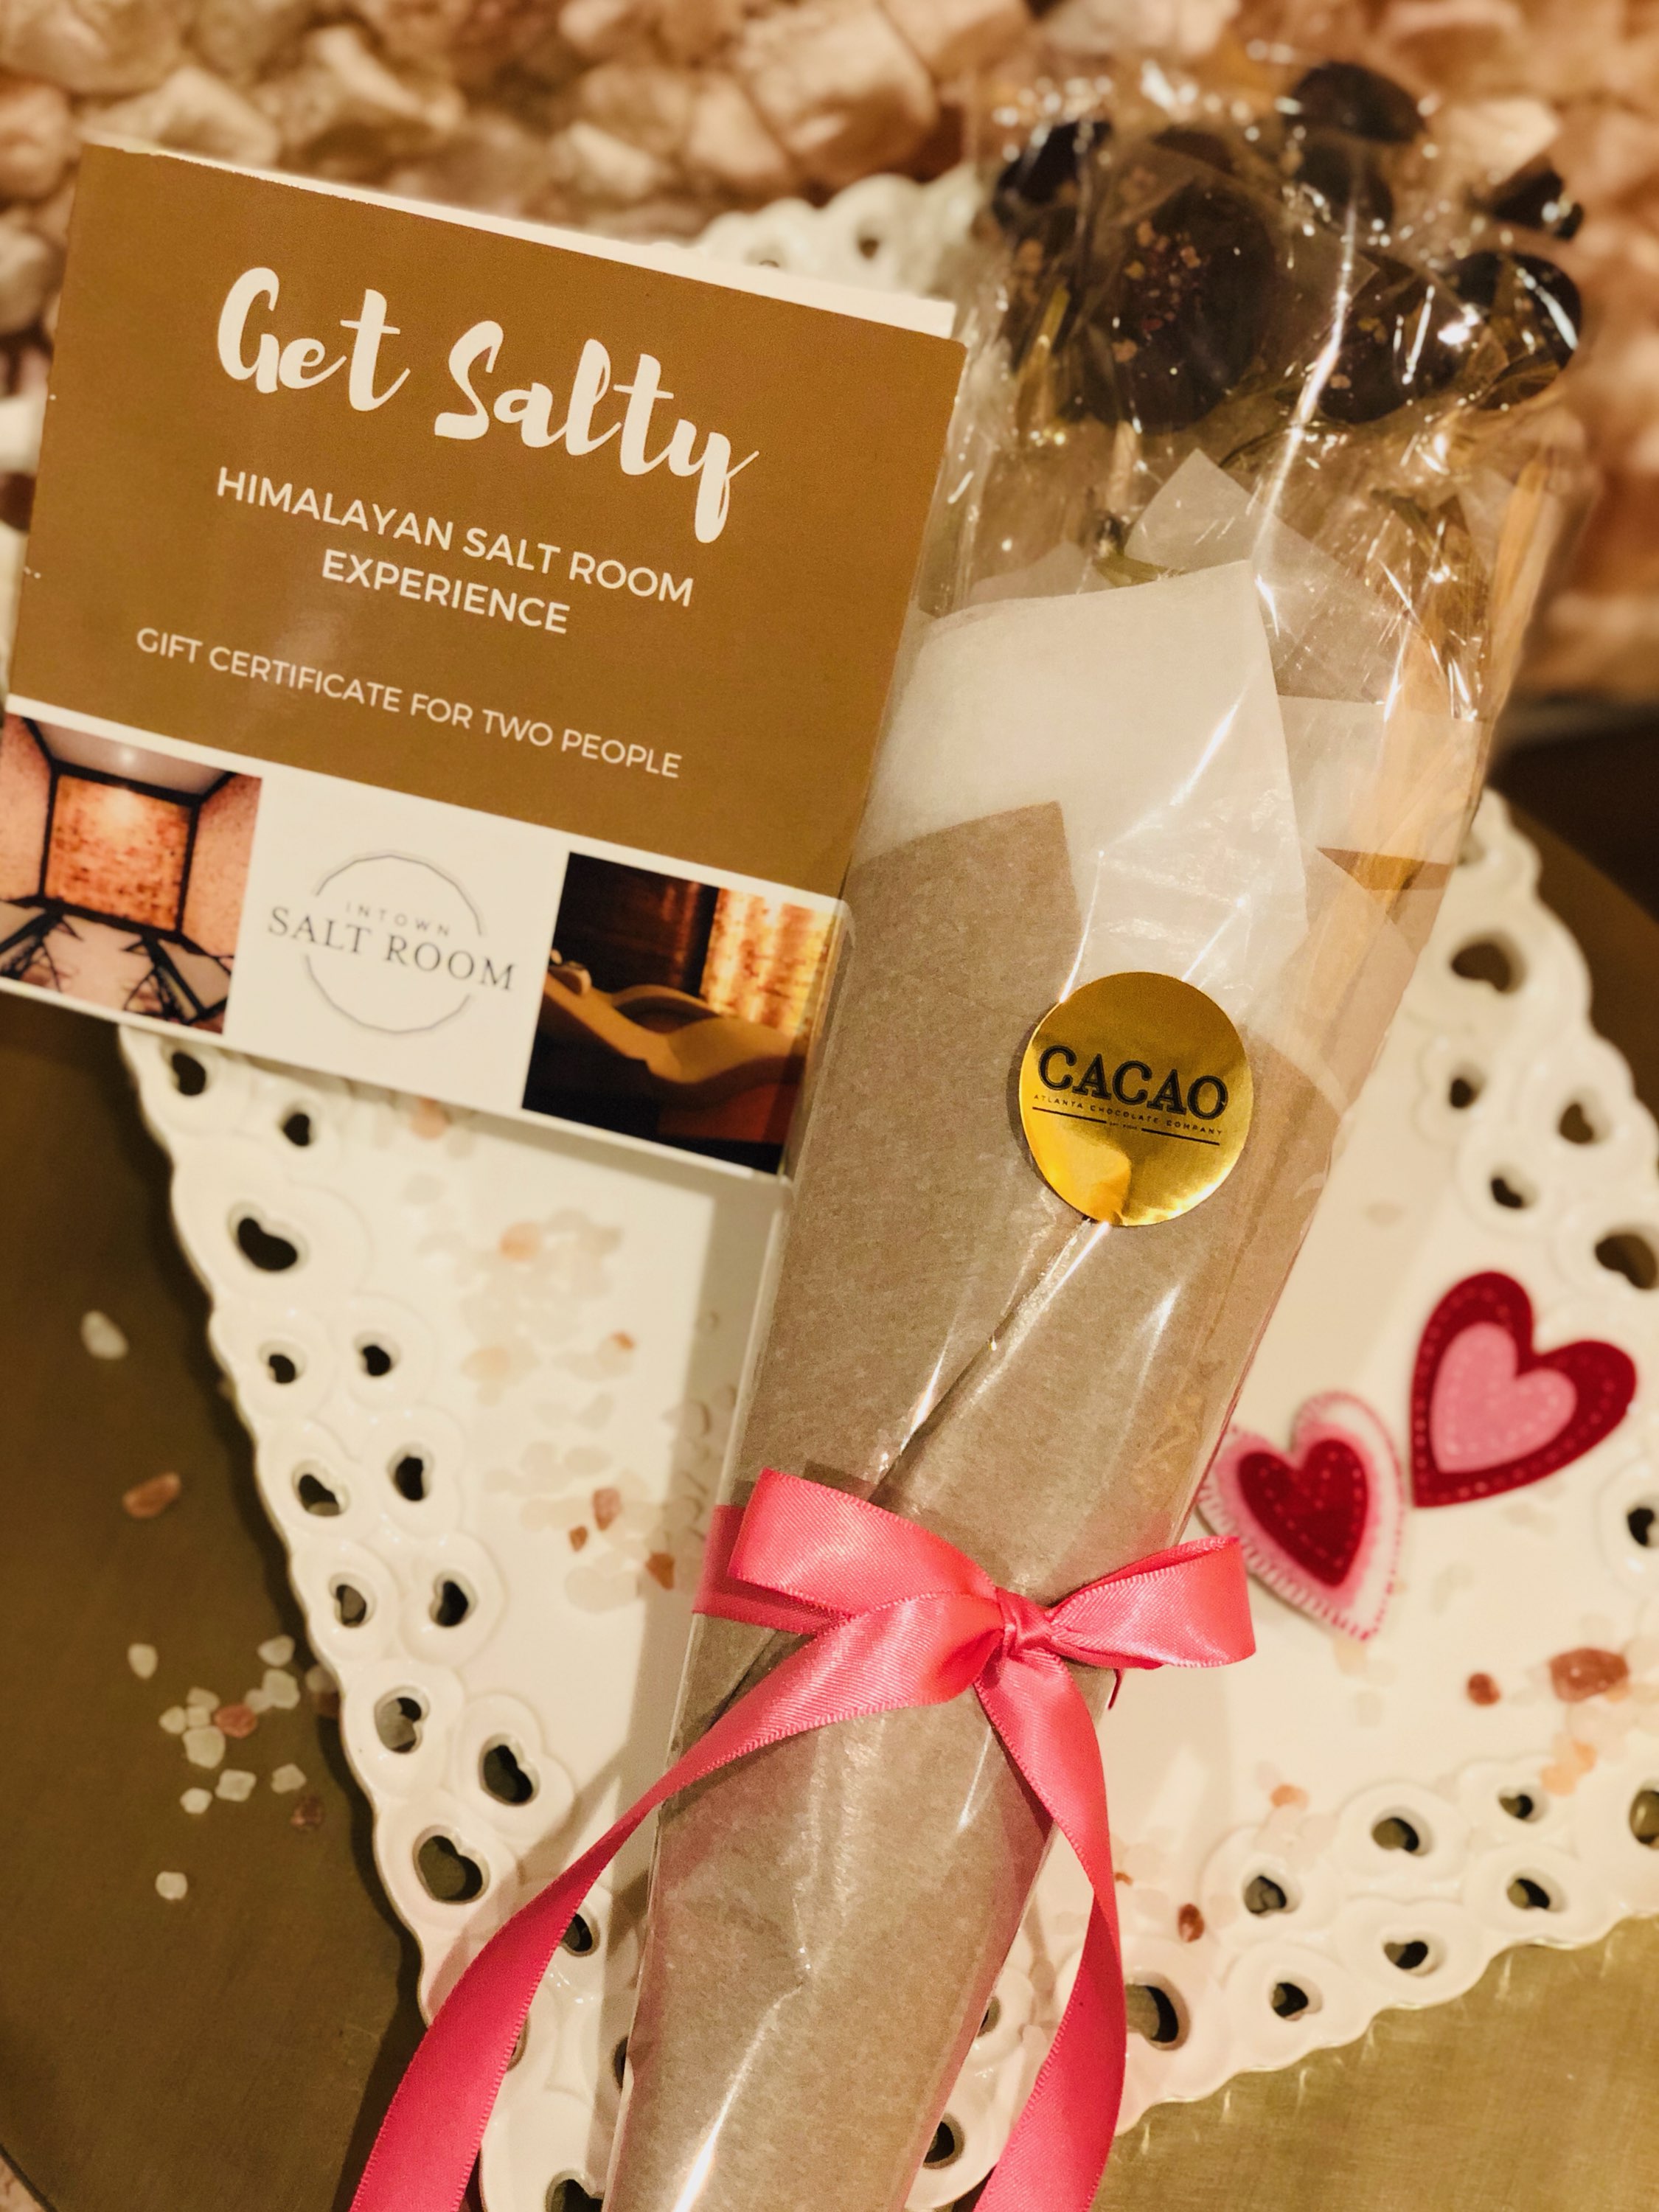 Giveaway alert: Valentine’s Day Gifts at Intown Salt Room